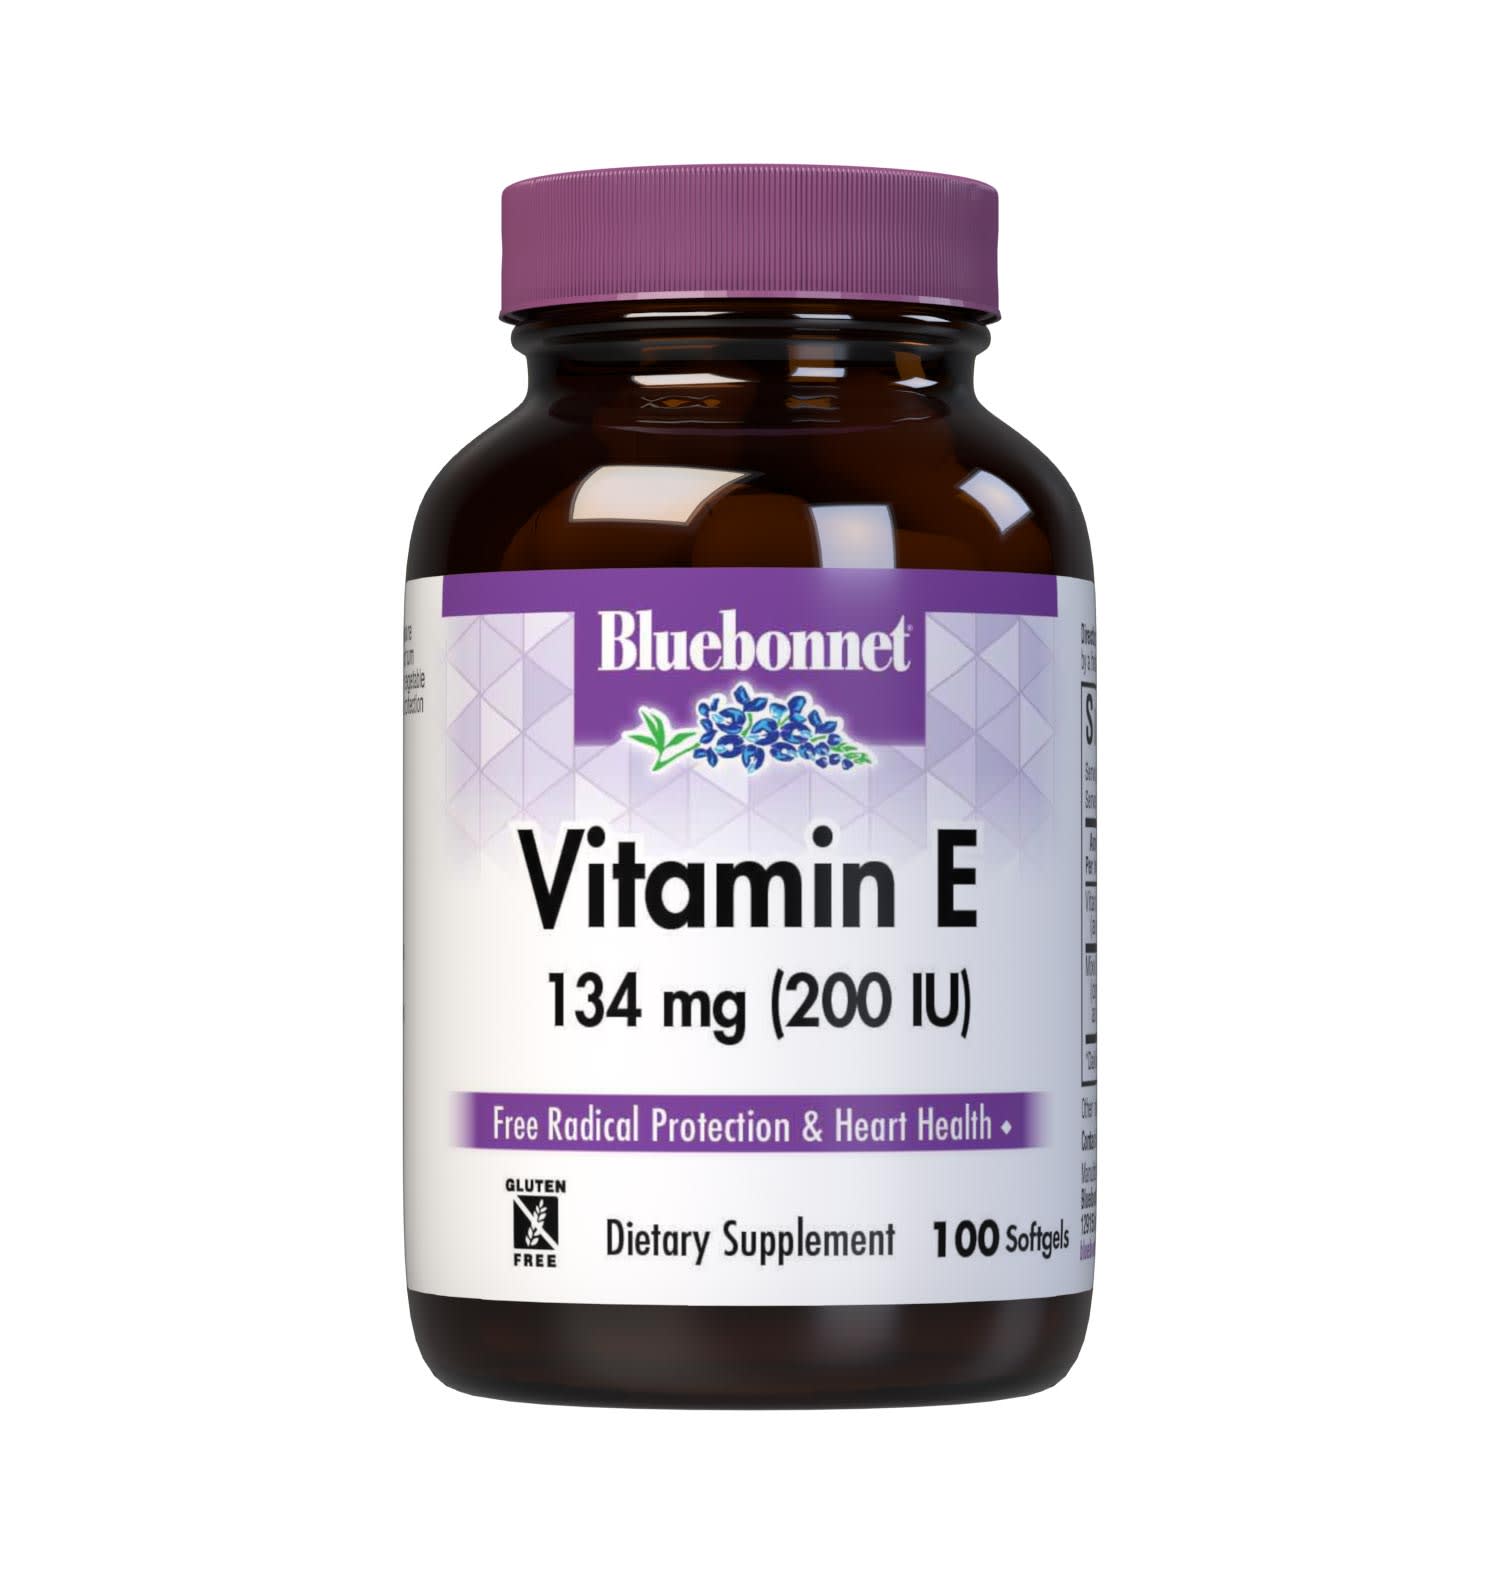 Bluebonnet’s Vitamin E 200 lU (134 mg) Mixed Softgels are specially formulated with d-alpha tocopherol and full spectrum tocopherol isomers (beta, delta and gamma) in a base of vegetable oil. Vitamin E is an antioxidant that provides free radical protection as well as cardiovascular support. #size_100 count